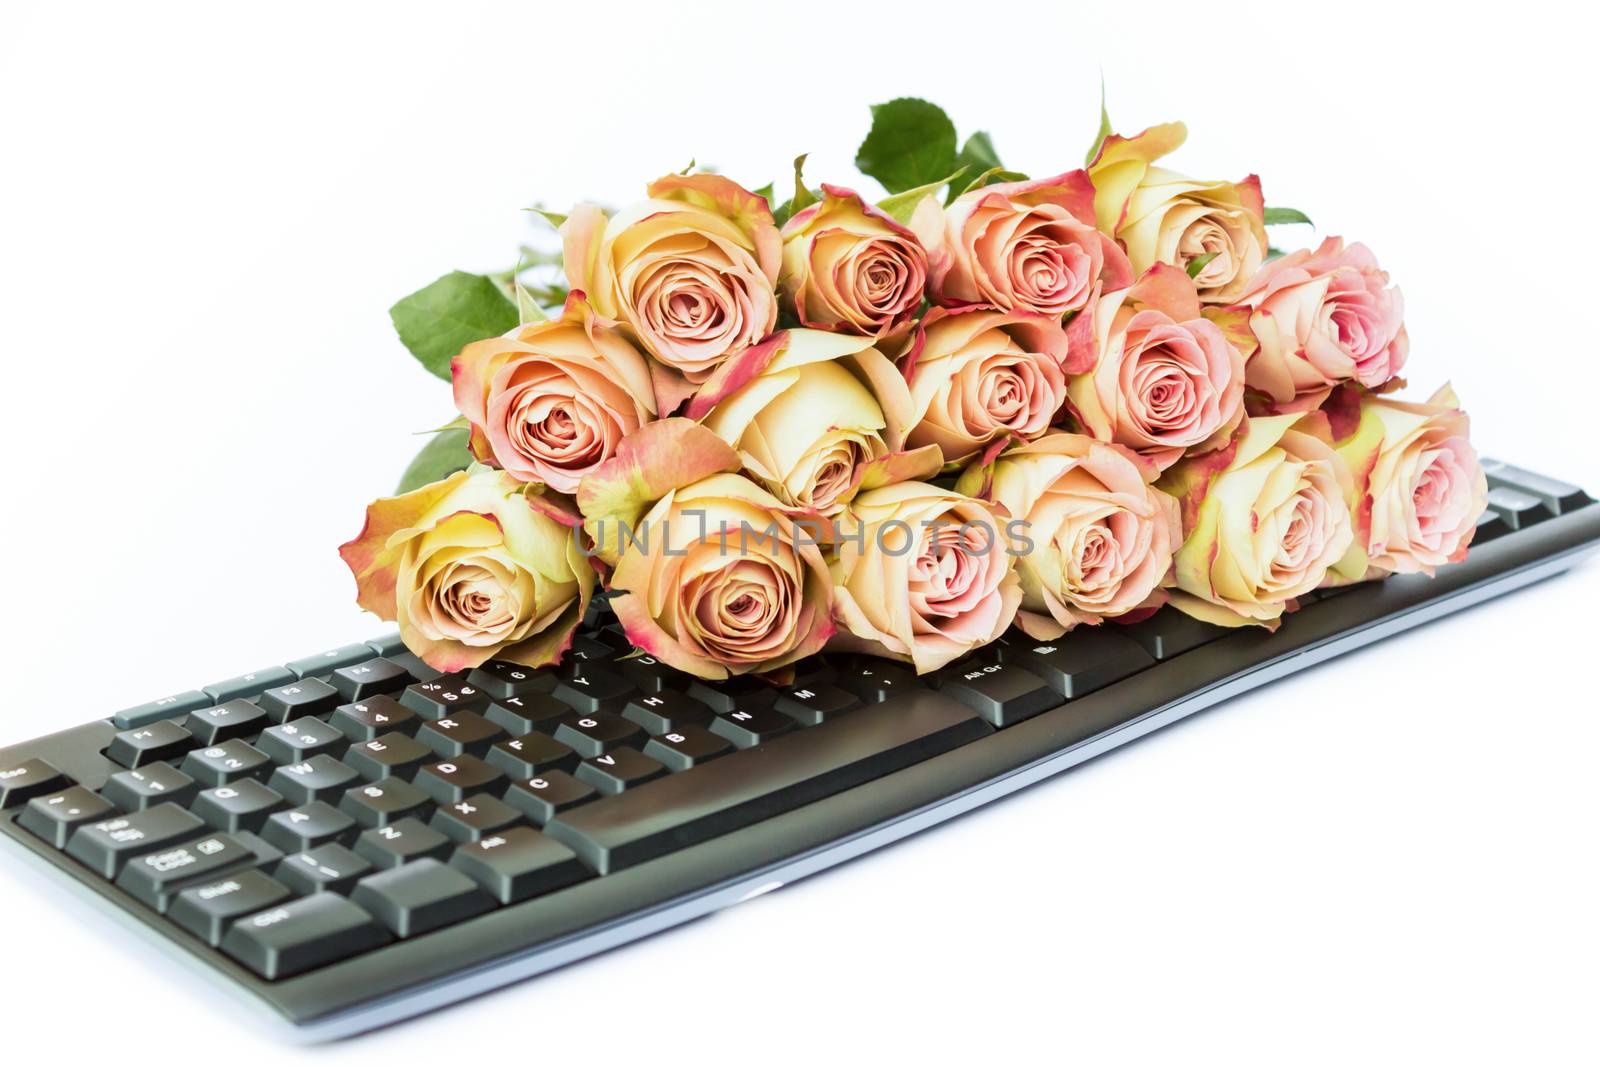 Bouquet of pink roses on keyboard isolated on white background